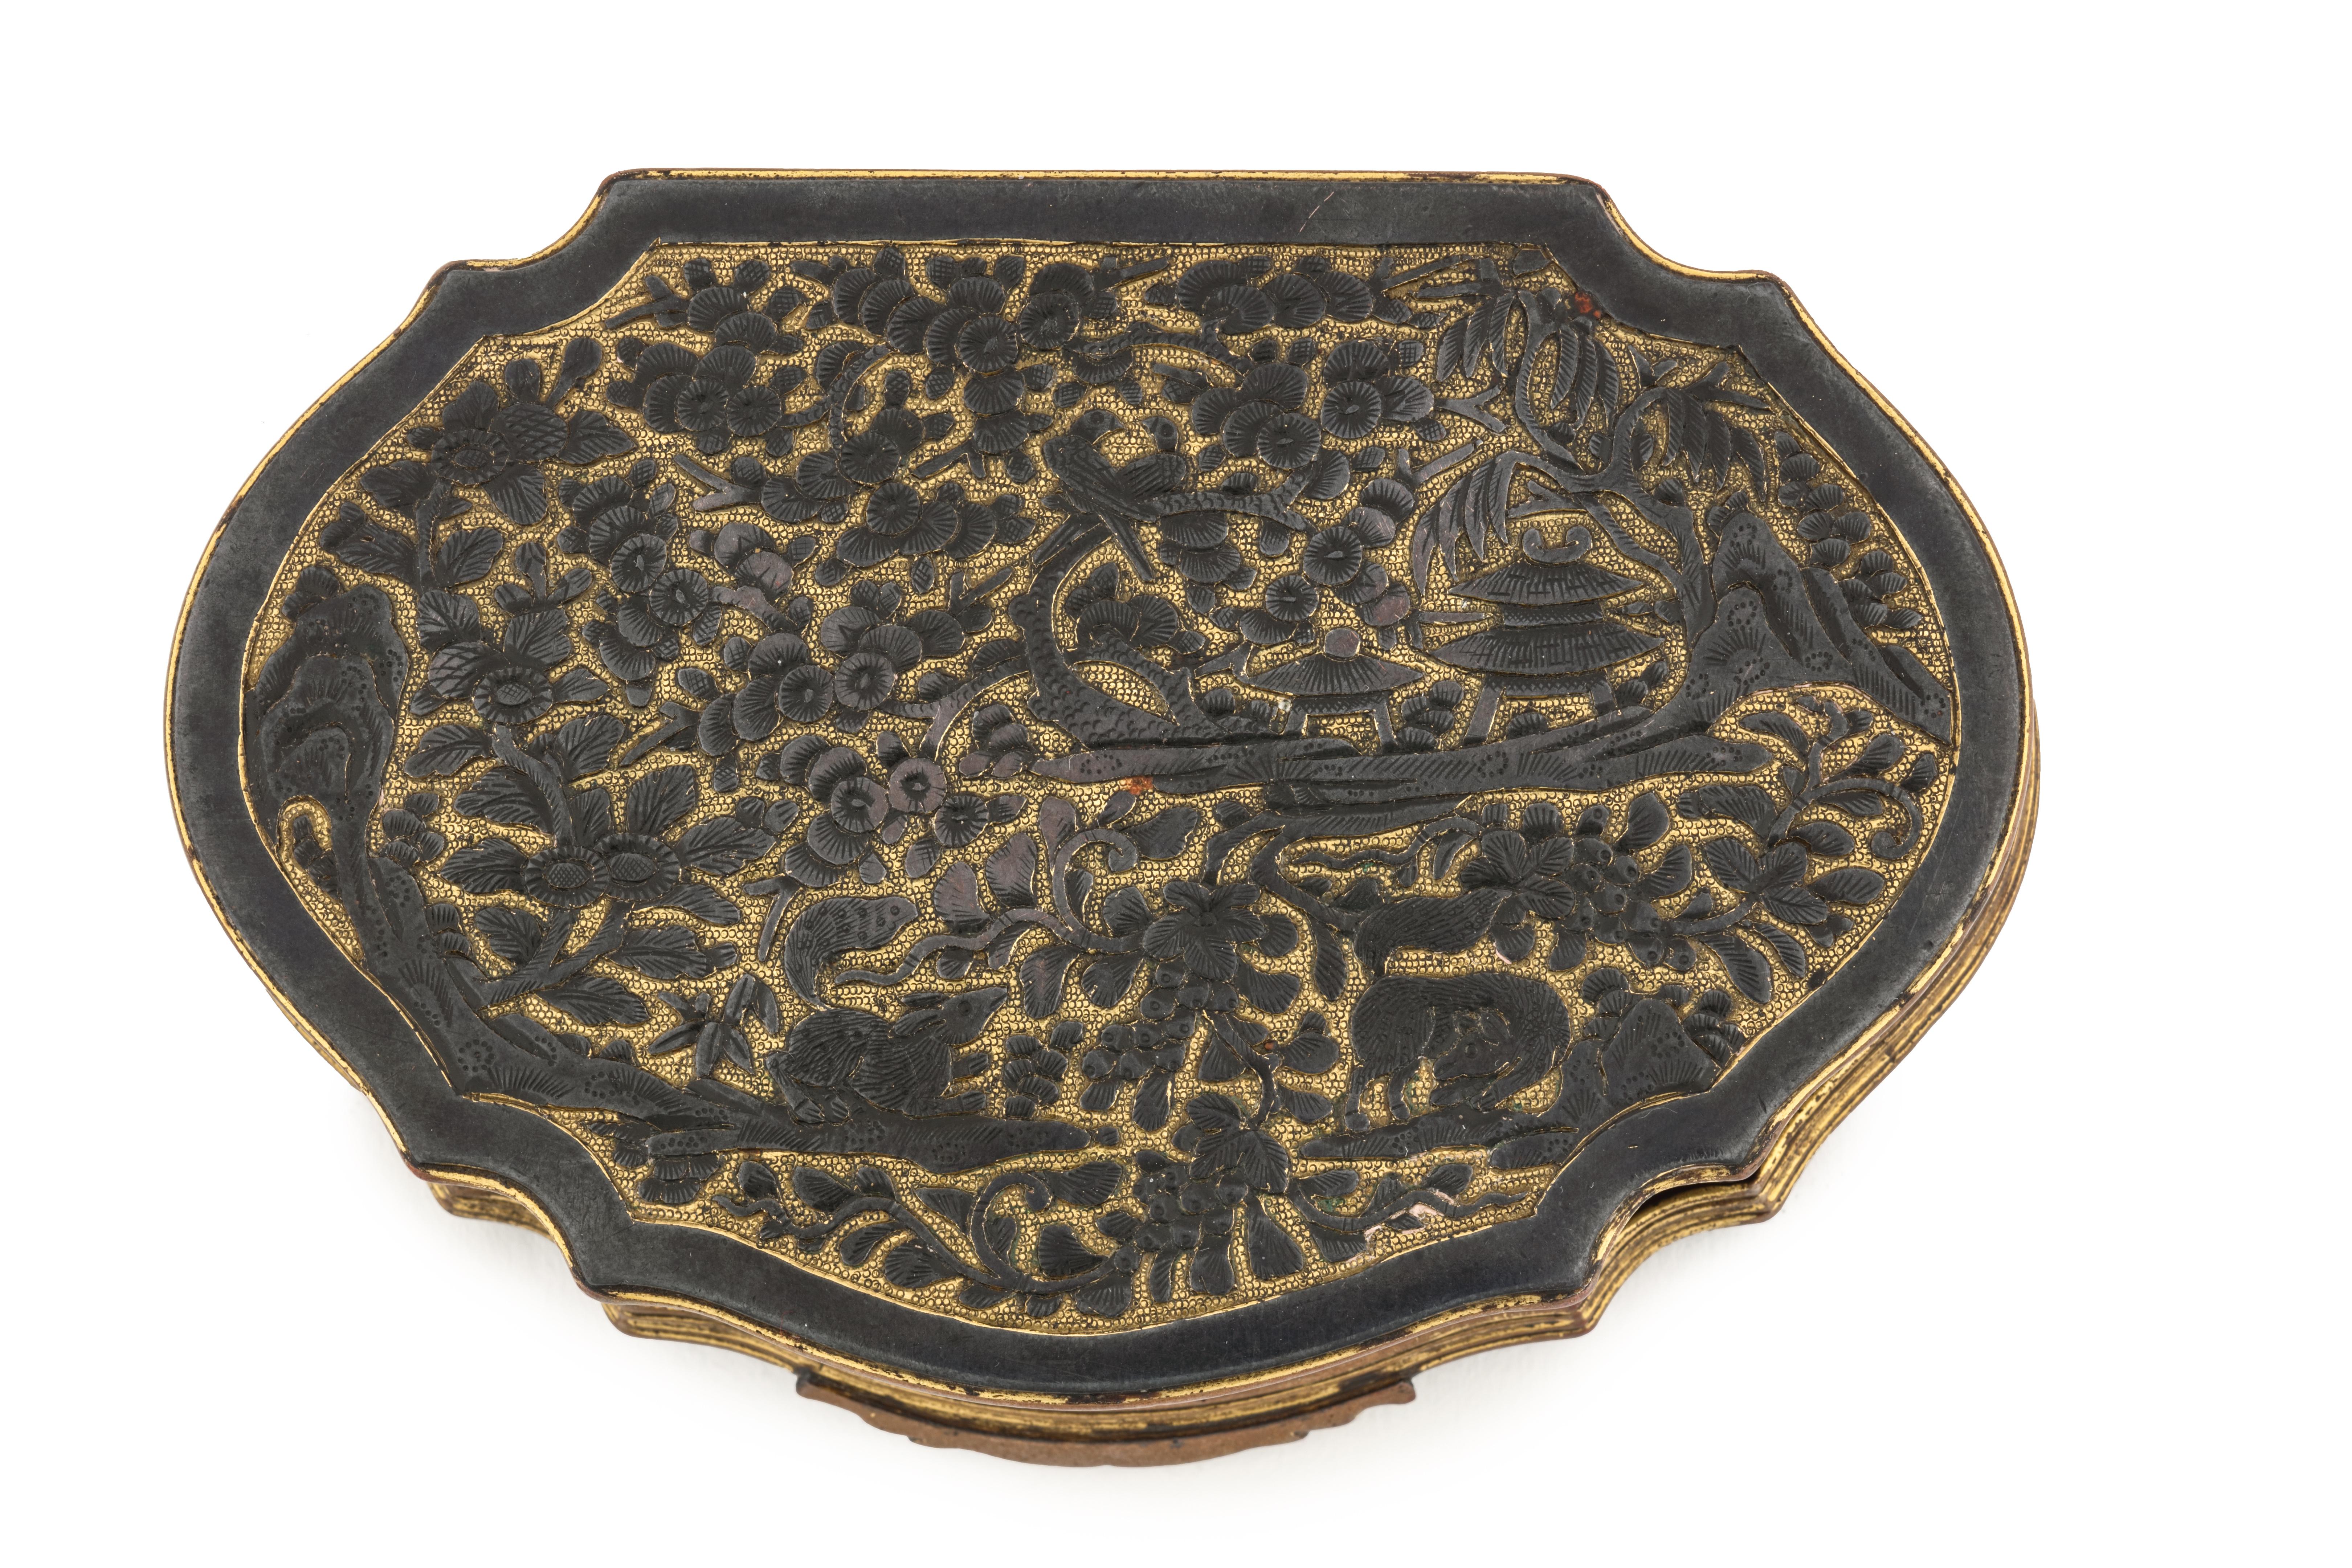 A ruyi-shaped Shakudo-style erotic tobacco or snuff box, relief-decorated with silvered applied figures

Possibly Jakarta (Batavia), first half 18th century

Measures: H. 2.2 x L. 12.1 x W. 8 cm

This box is very much in the Dutch taste, for